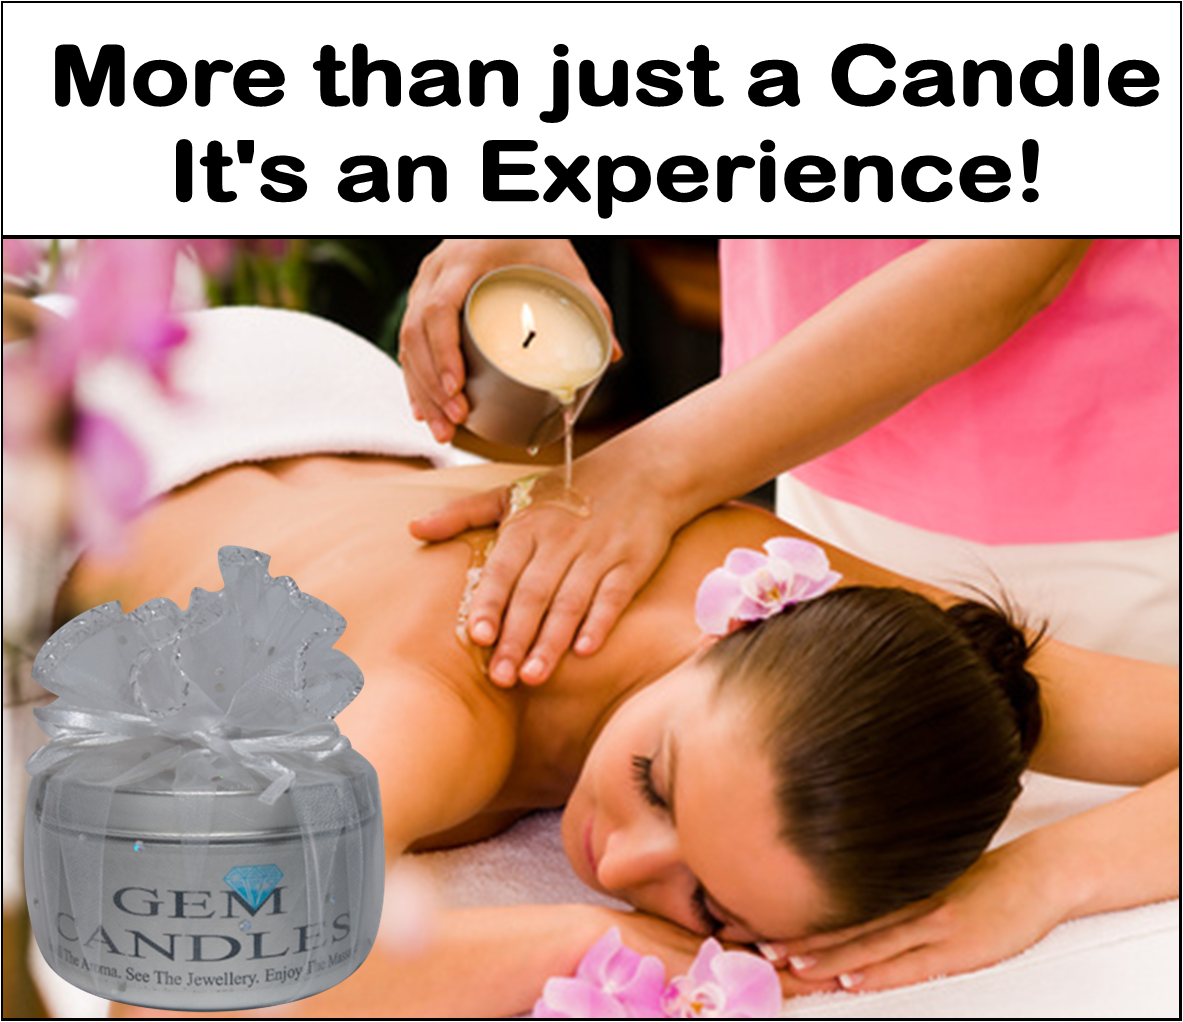 Massage Jewellery In a Candle - Unscented